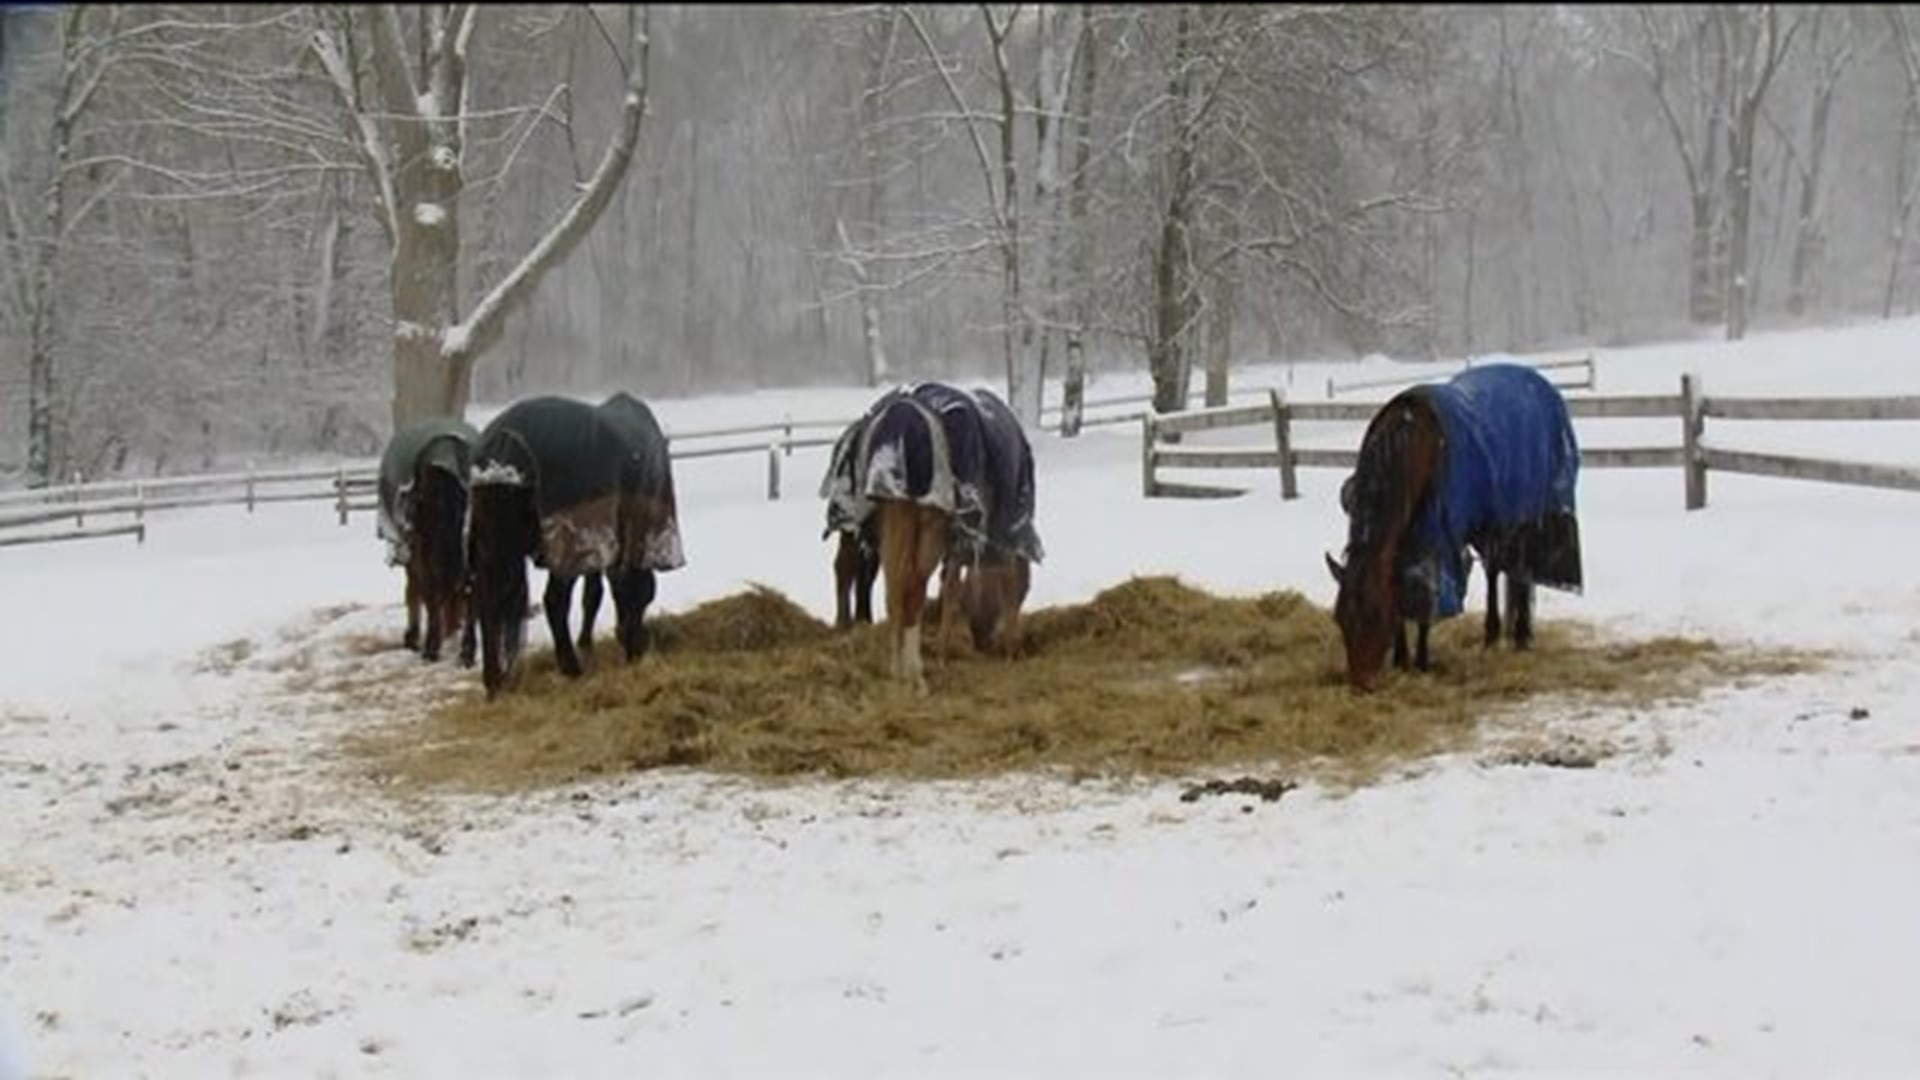 Horses need help after barn collapse in Lebanon